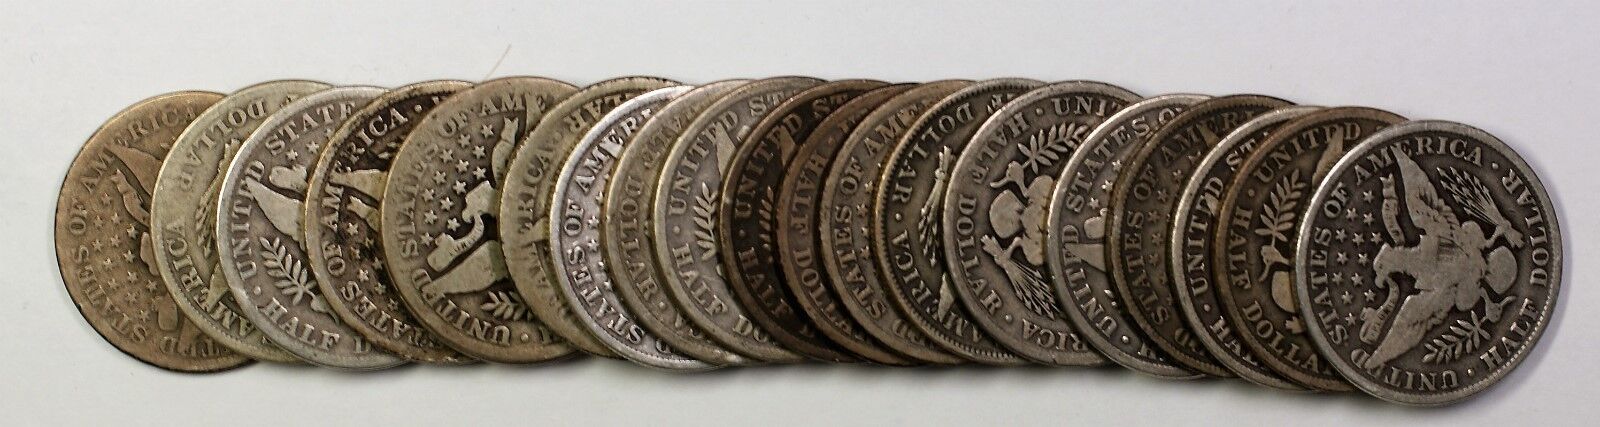 1912-S Barber Half Dollar 50c Roll 20 Circulated 90% Old Silver Coins Lot